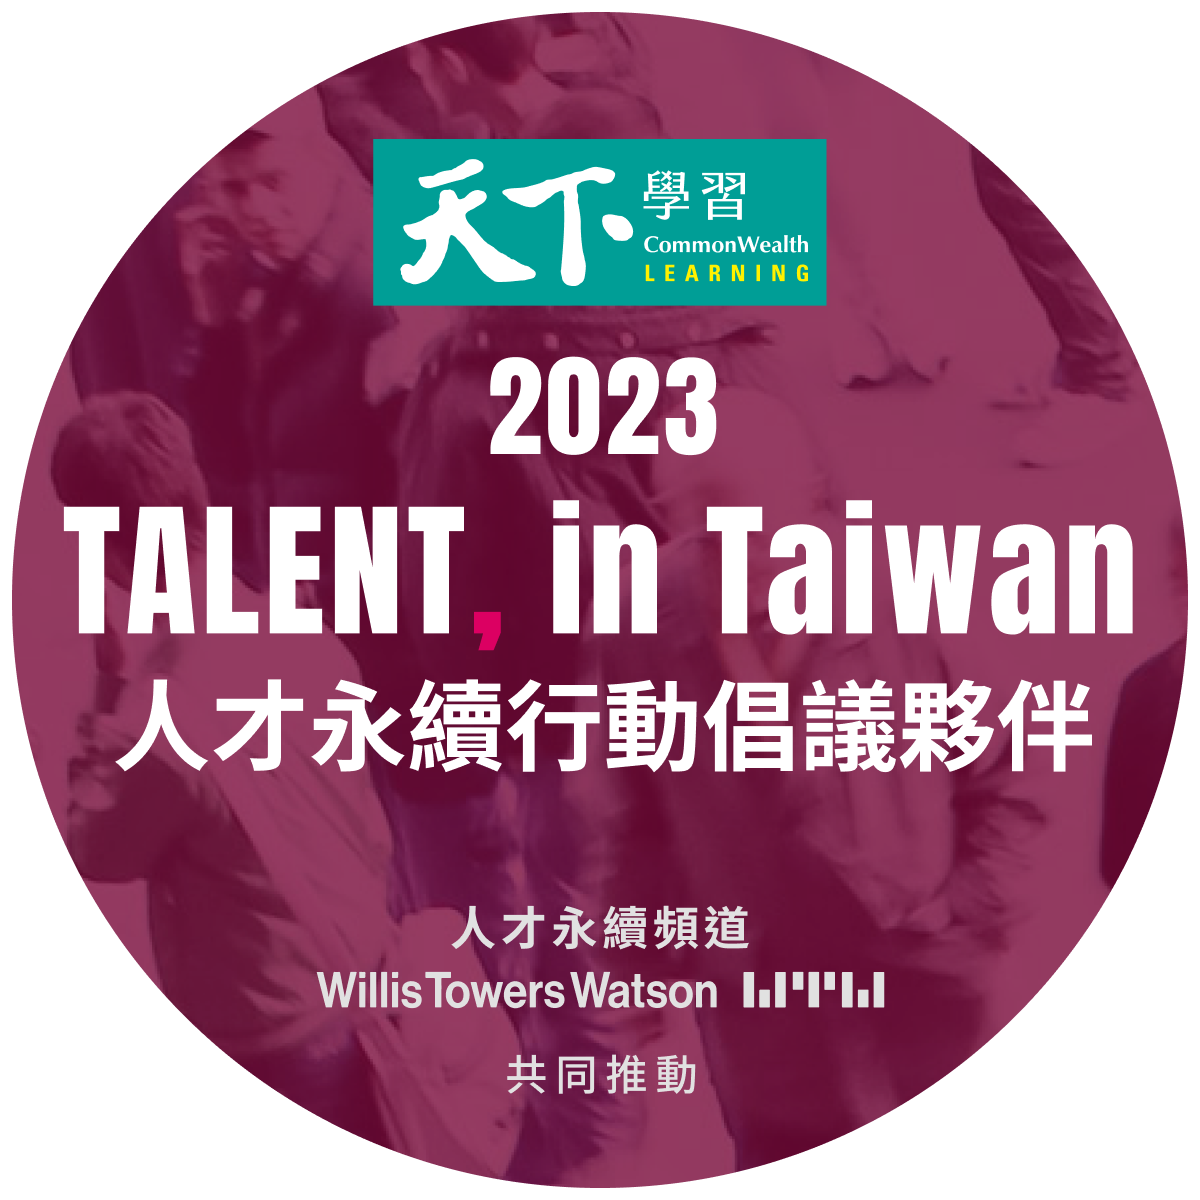 GOTREND announced to Join the“2023 TALENT, in Taiwan, Taiwan Talent Sustainability Action Alliance”